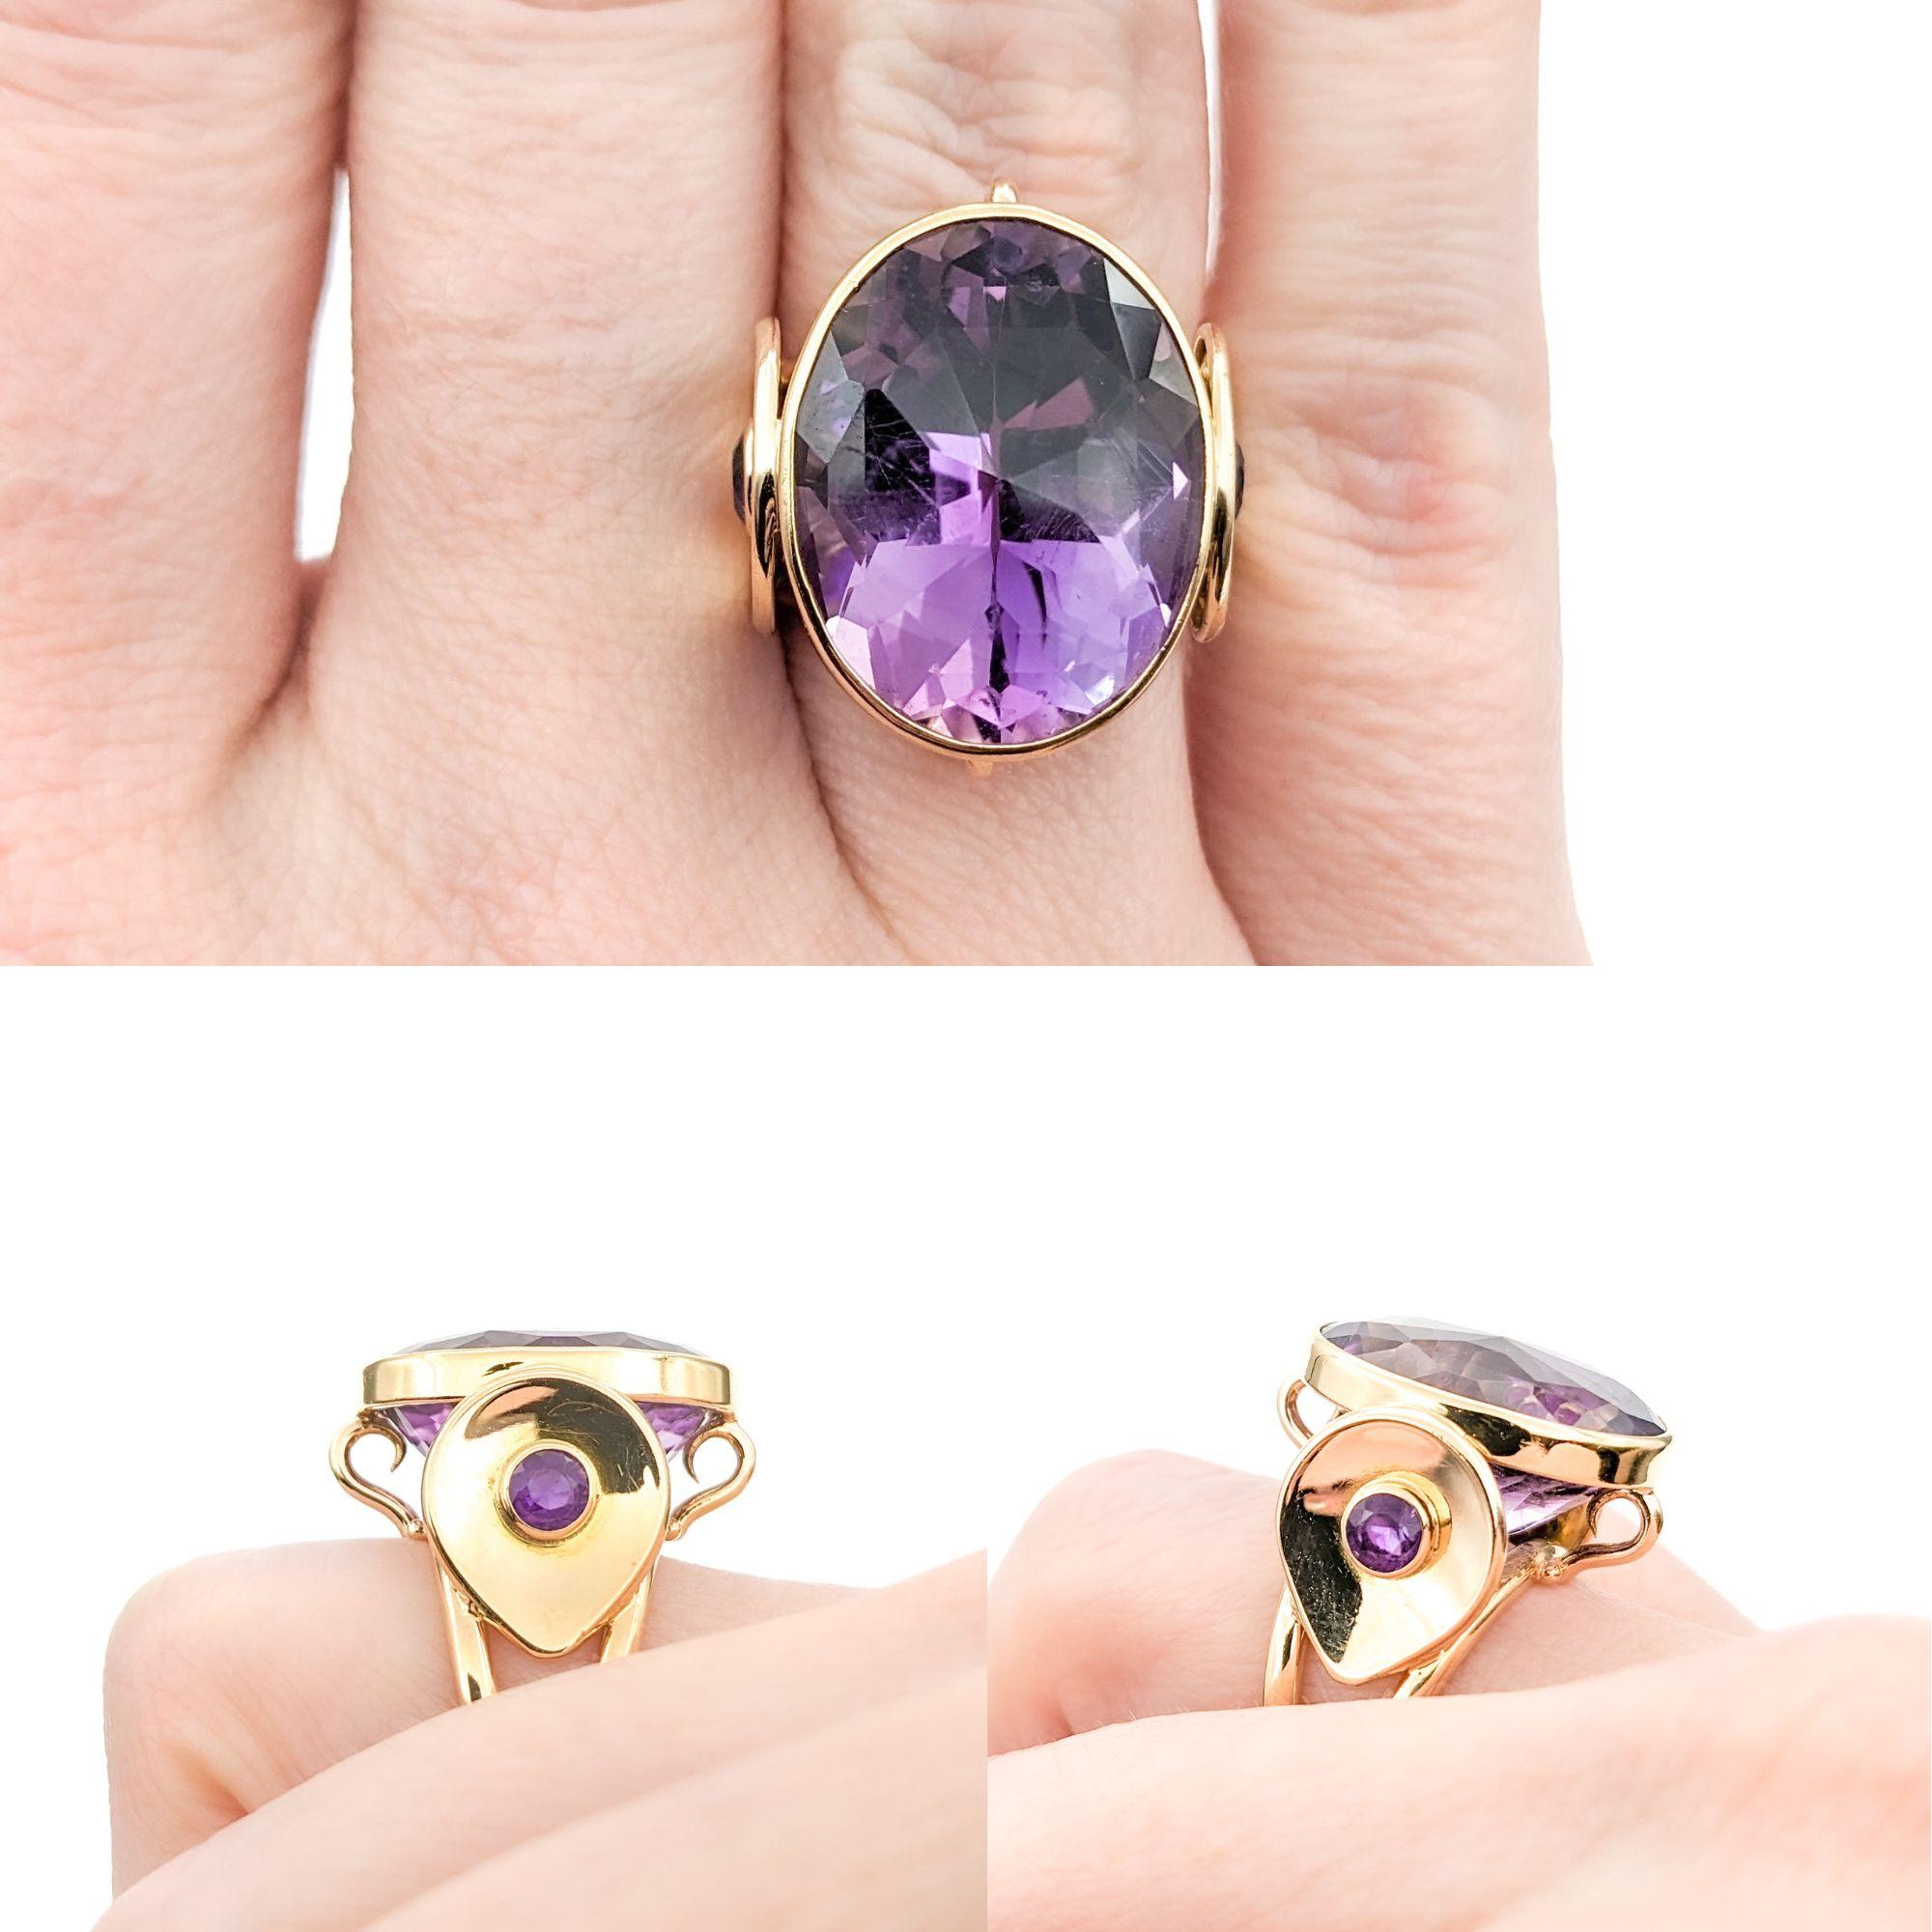 Vintage 11.50ct Amethyst Ring In Yellow Gold

Introducing this beautiful Vintage Ring crafted in 14kt yellow gold. This ring features a stunning 11.50ct oval Amethyst centerpiece, flanked by .30ctw of complementary amethysts, creating a regal and